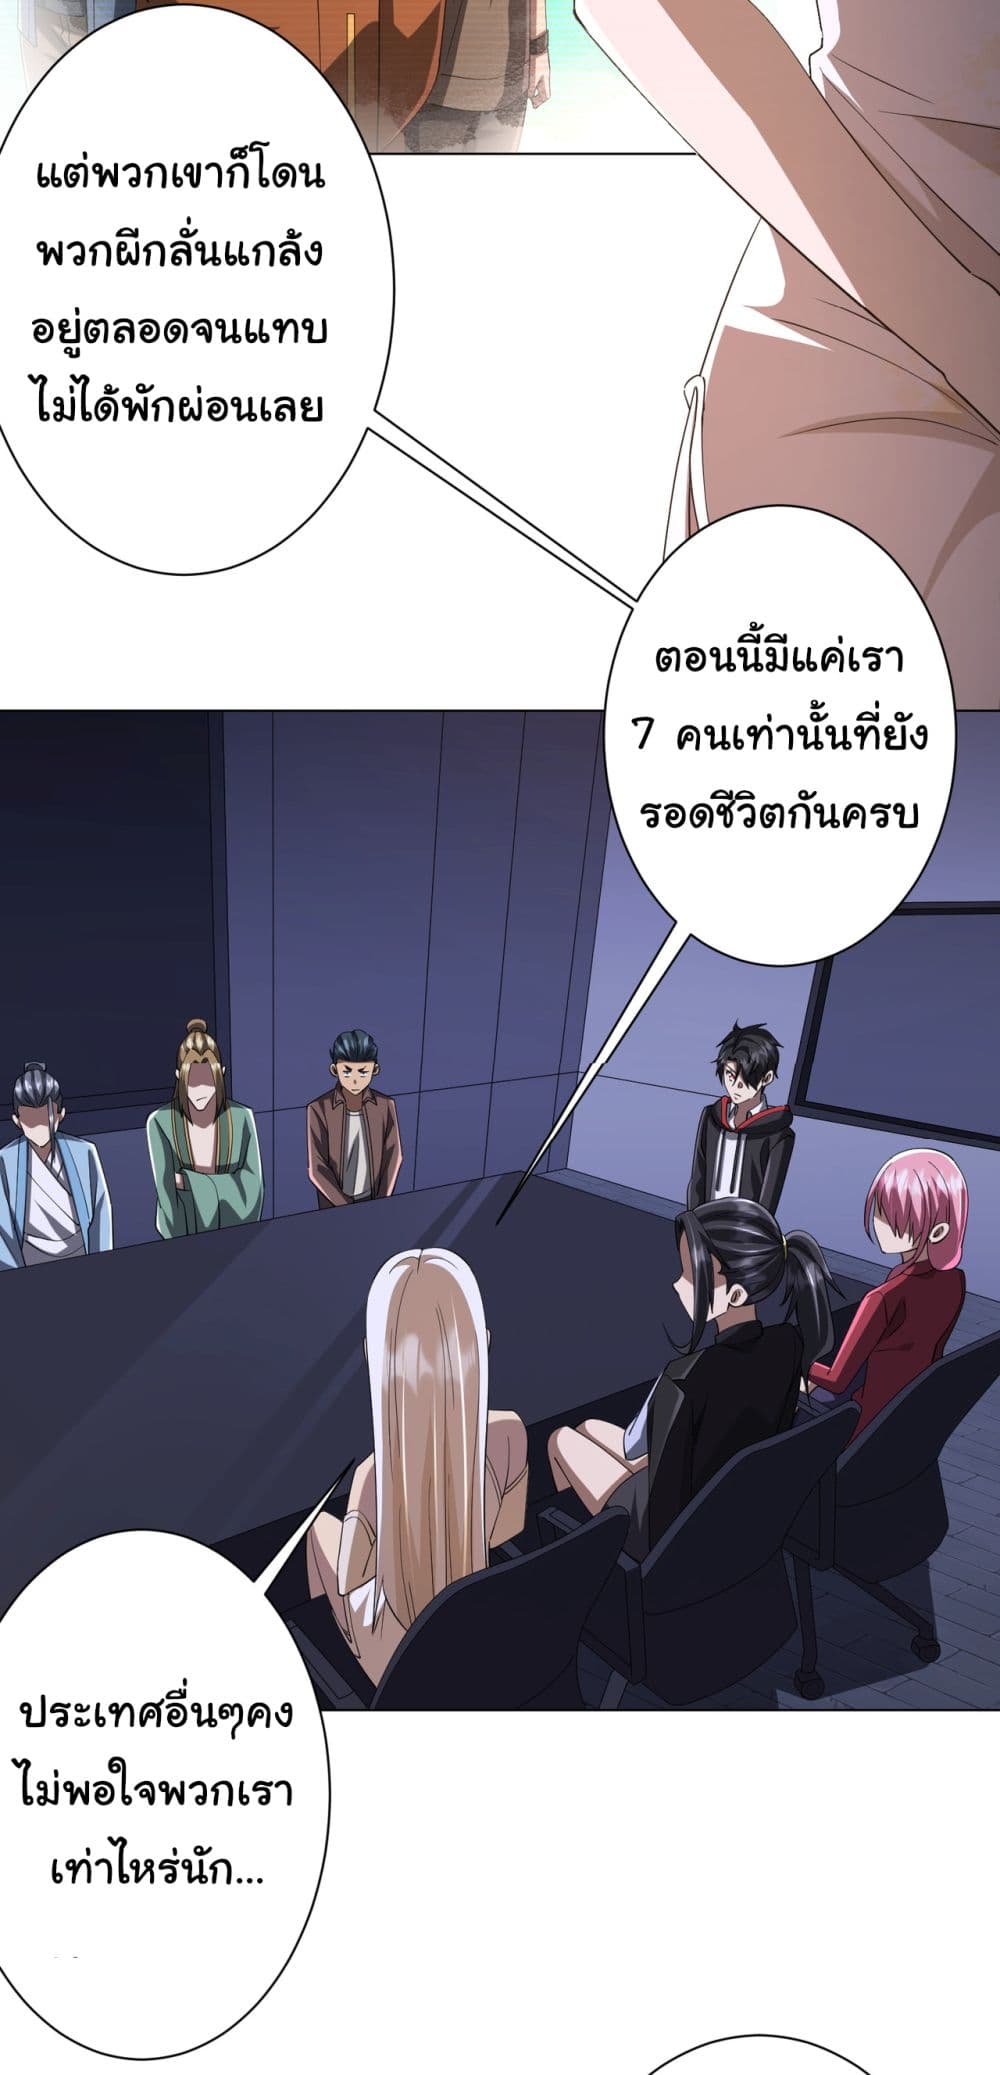 Start with Trillions of Coins ตอนที่ 76 (5)